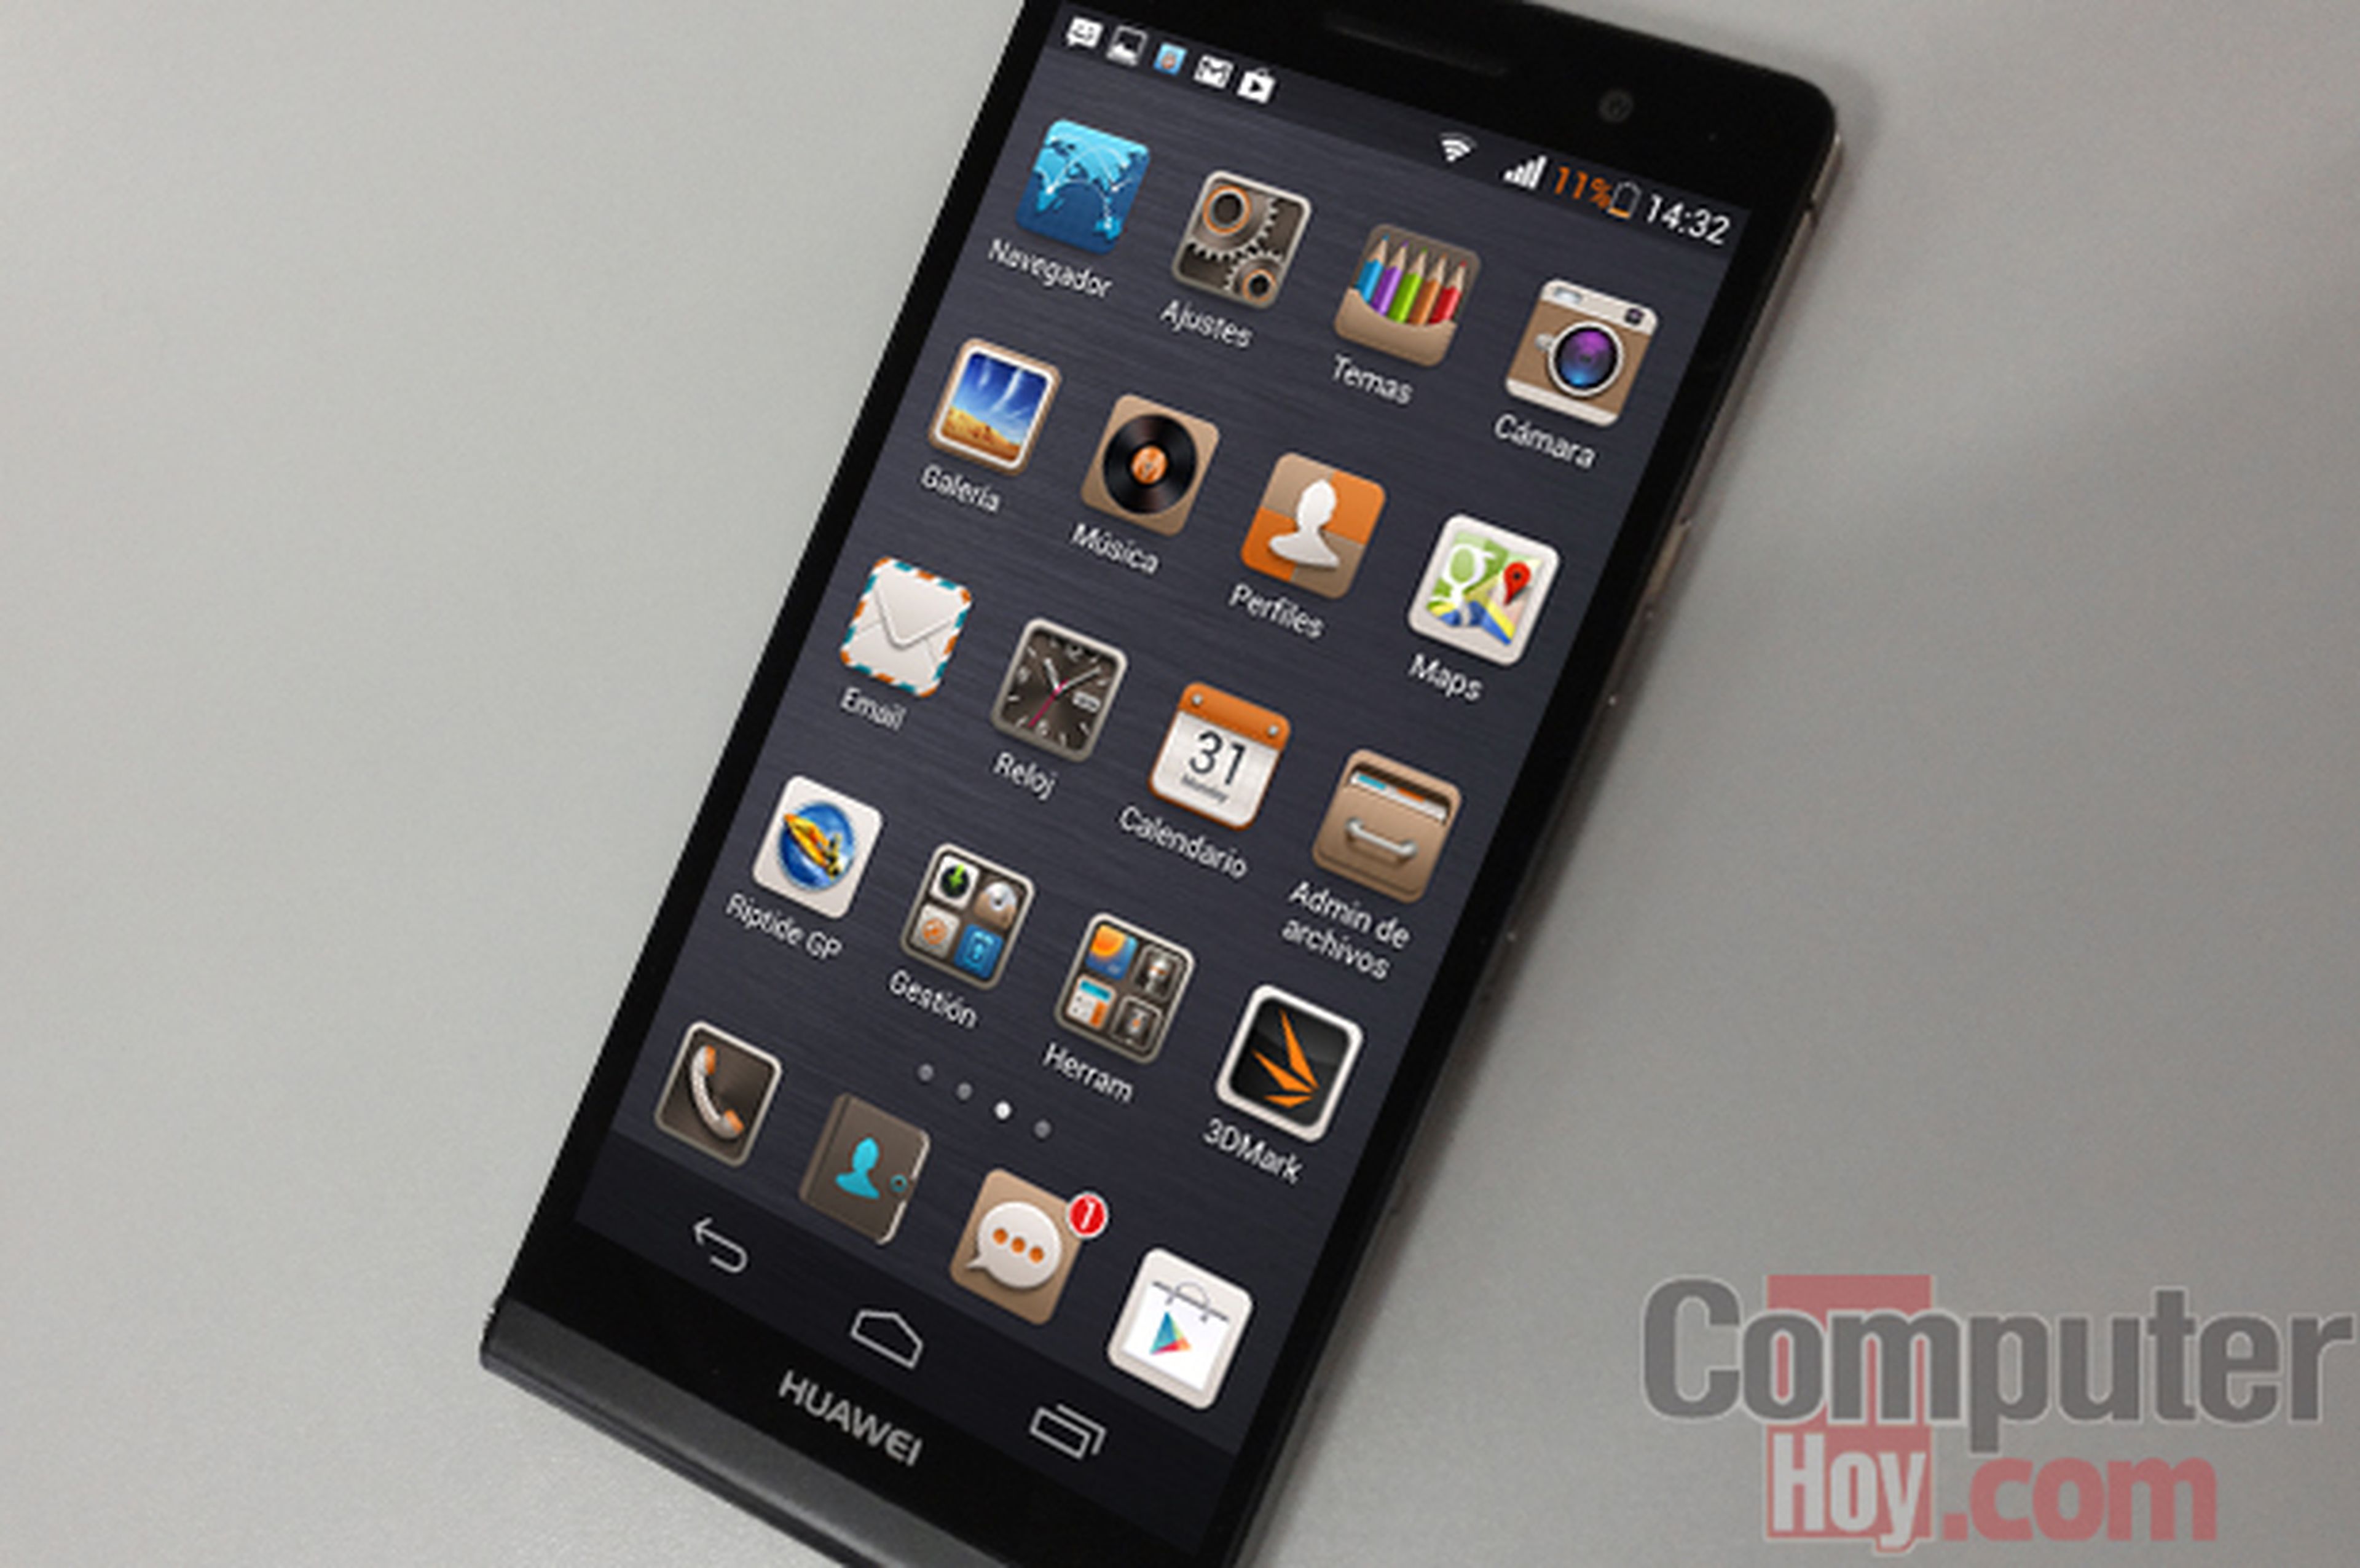 Huawei Ascend P6 software